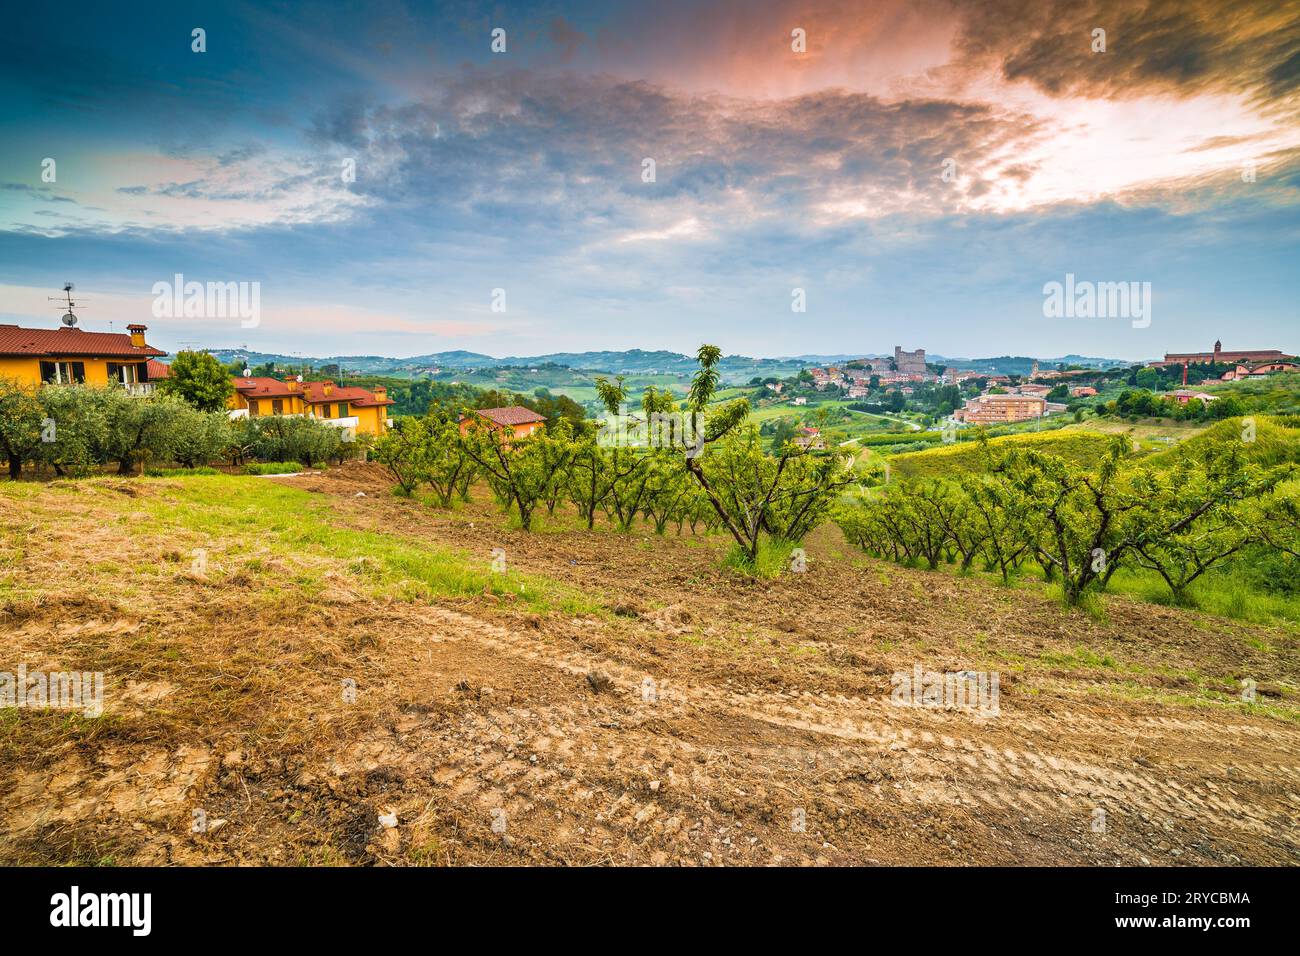 Plowed field in countryside around a medieval castle Stock Photo